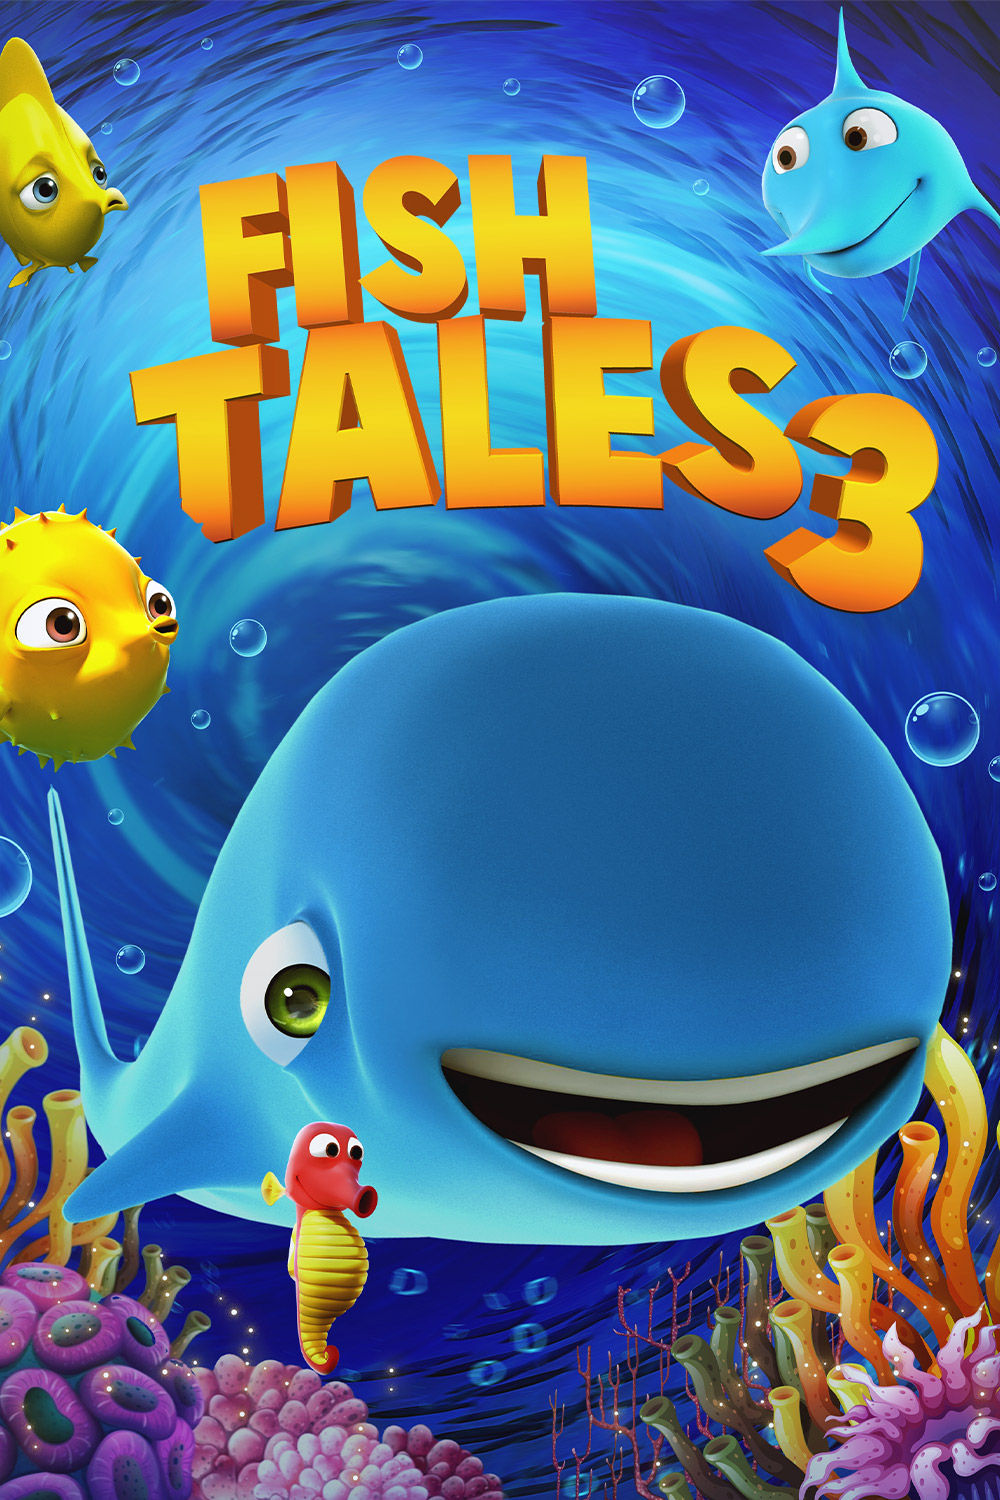 Watch Fish Tales 3 Movie Online | Buy Rent Fish Tales 3 On BMS Stream